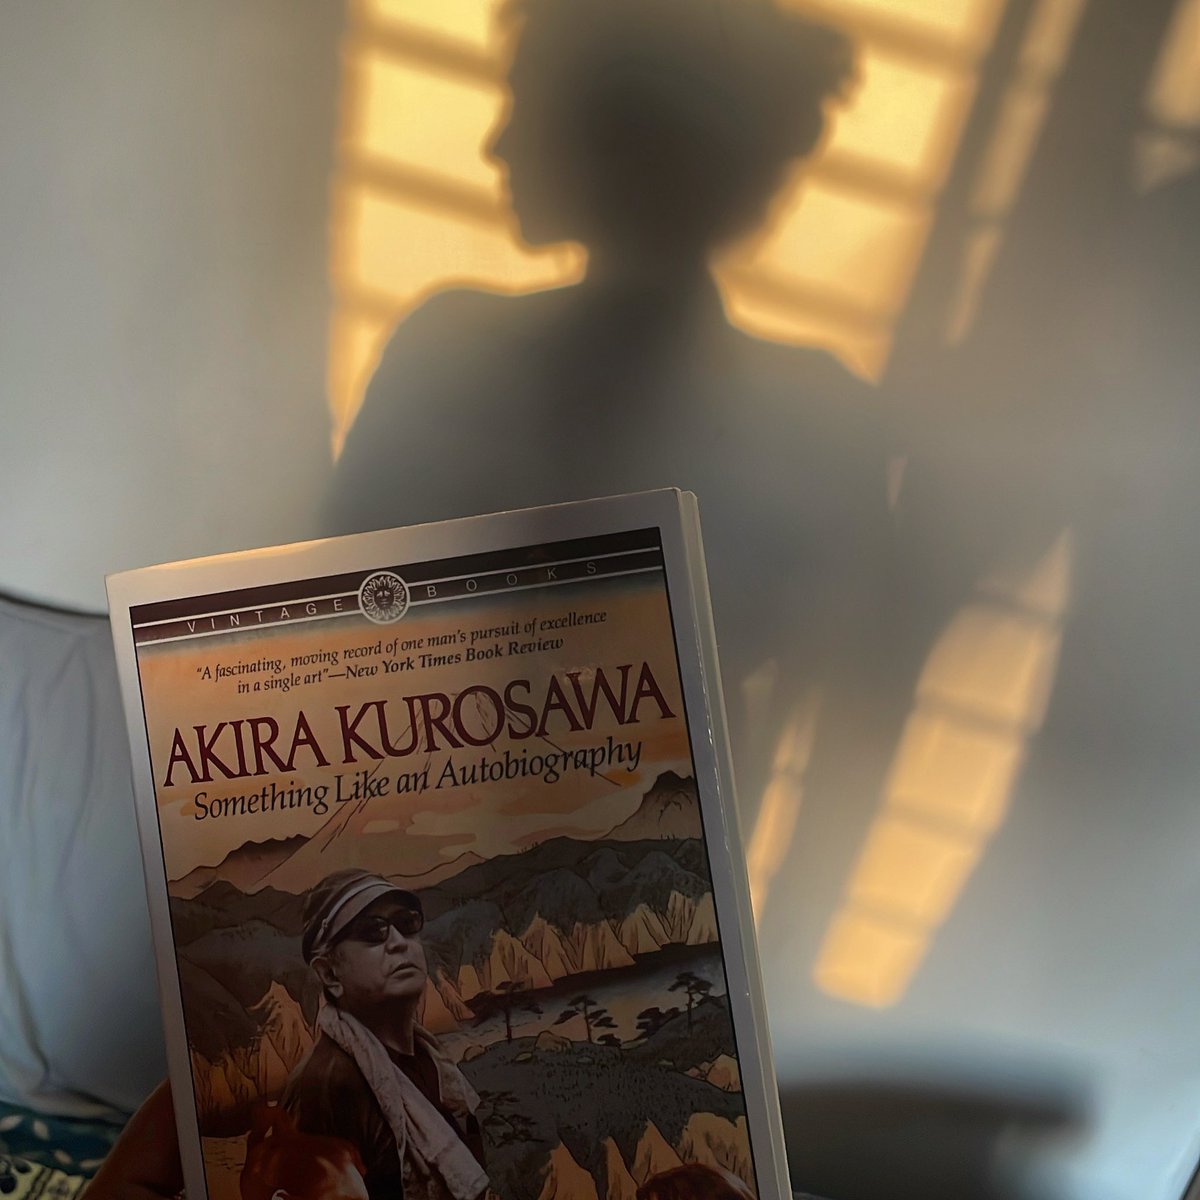 “In a mad world, only the mad are sane.”
~ Akira Kurosawa 

#currentread #thebookshow